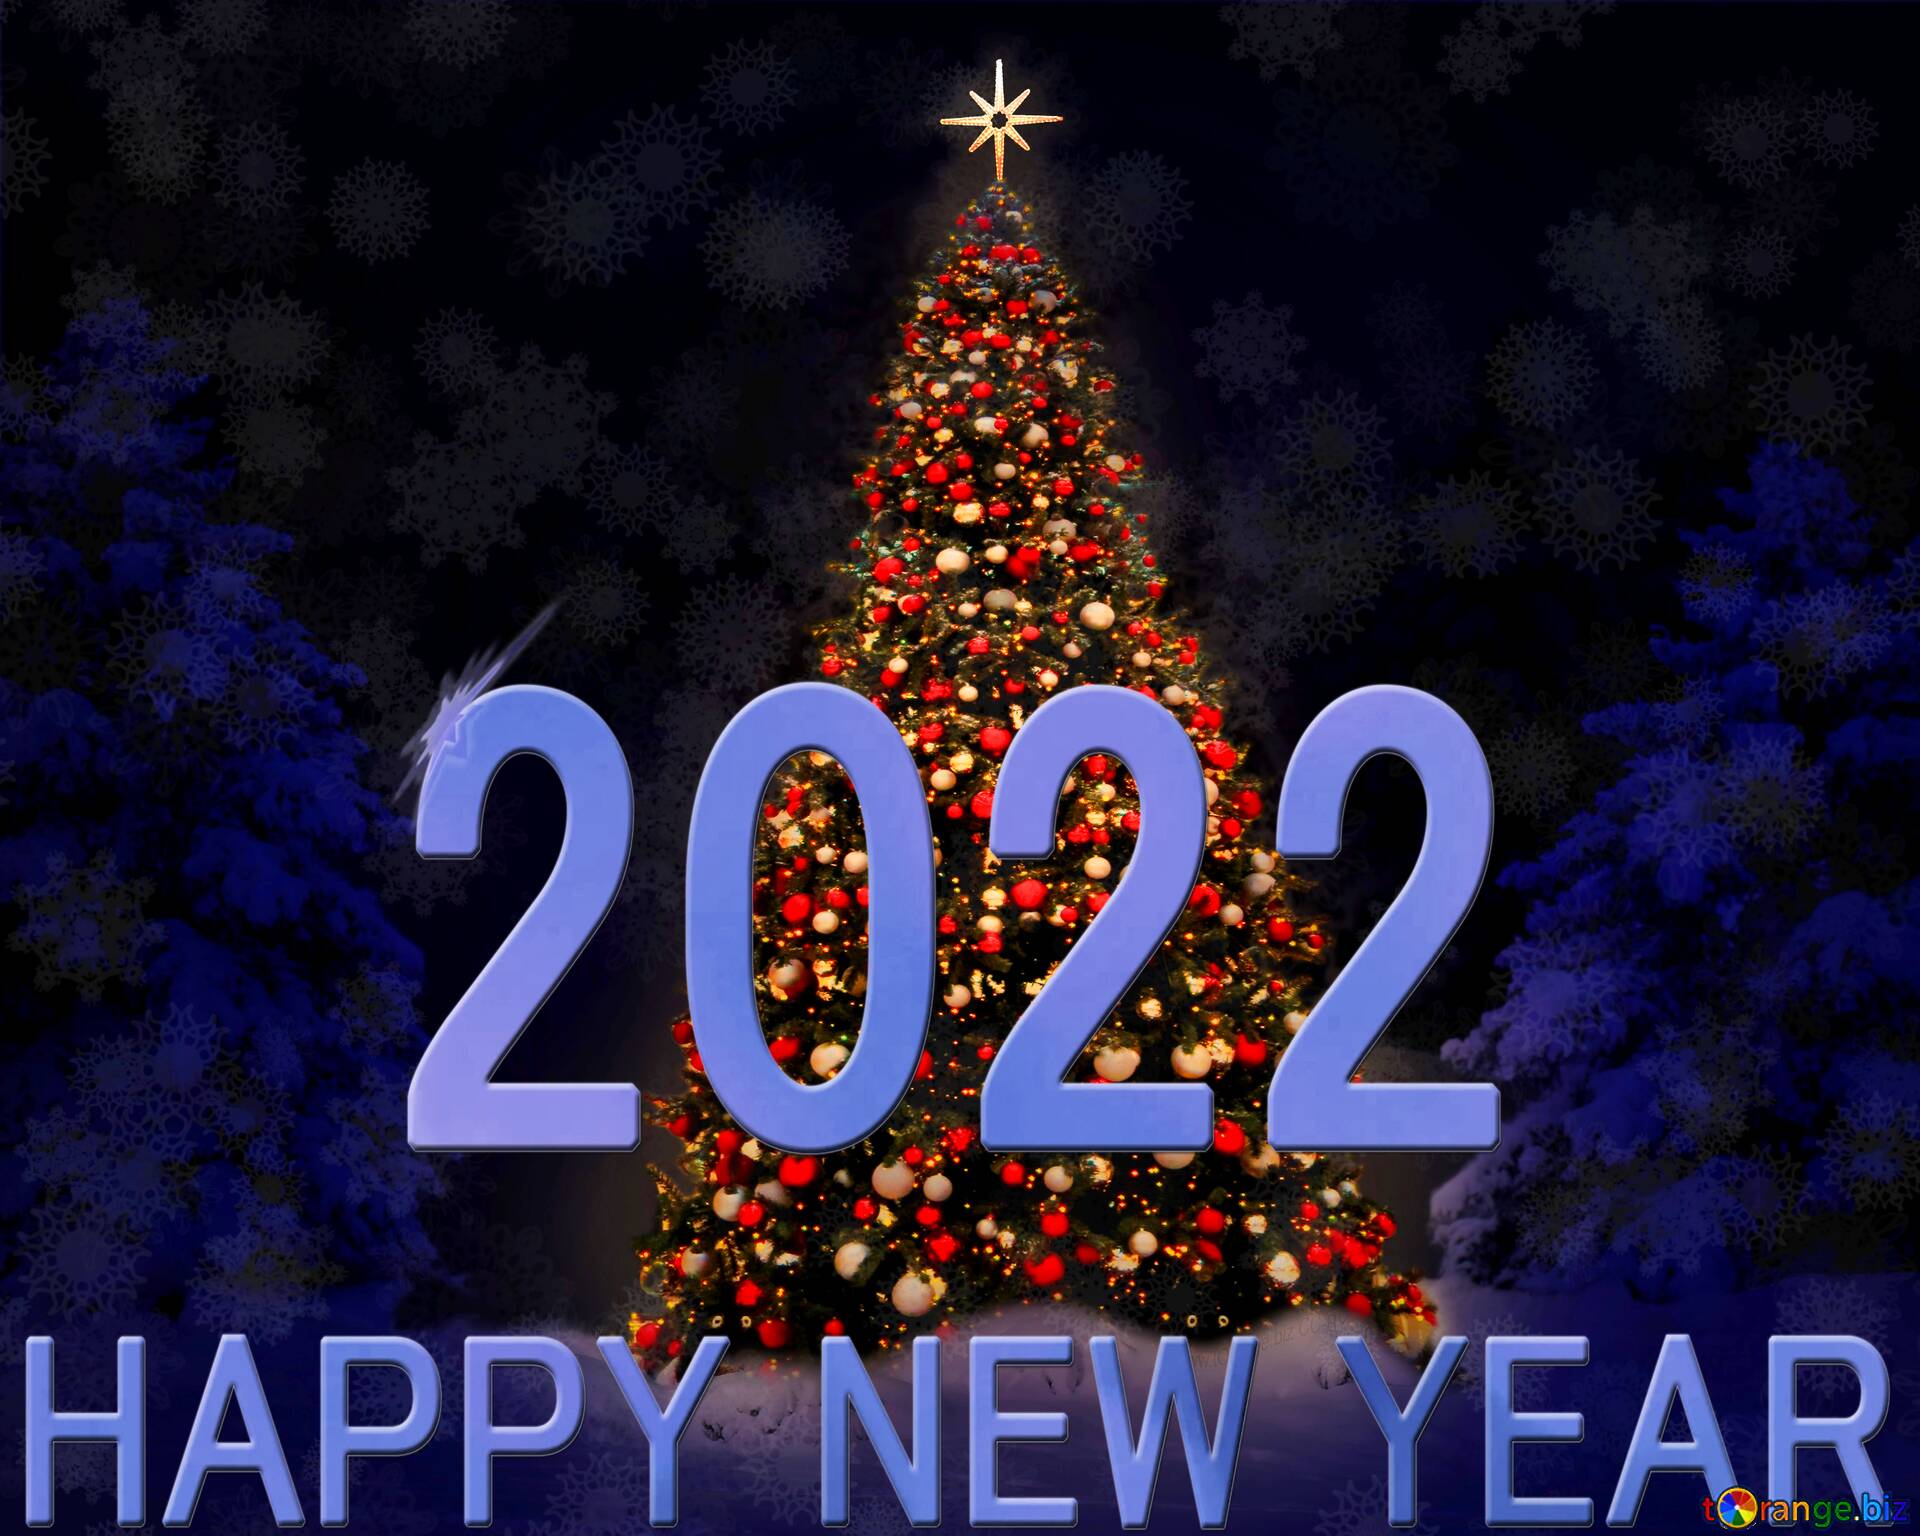 Download Free Picture Christmas Tree Happy New Year 2022 Blue On CC BY License Free Image Stock TOrange.biz Fx №216474